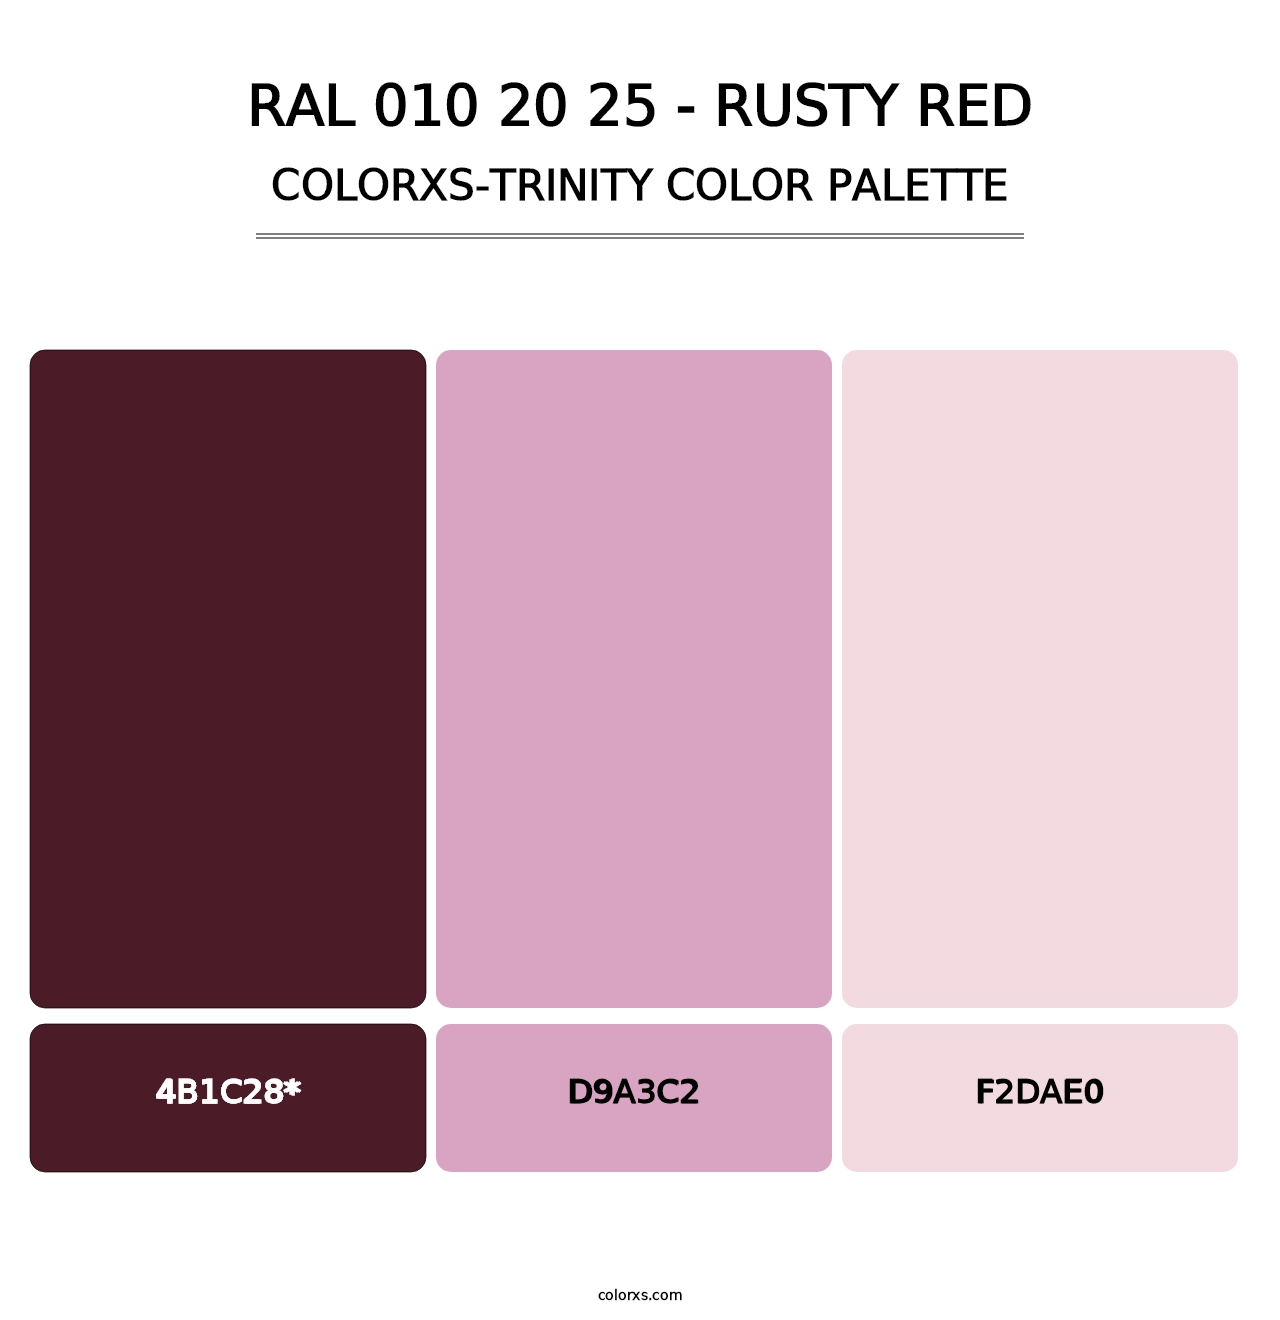 RAL 010 20 25 - Rusty Red - Colorxs Trinity Palette